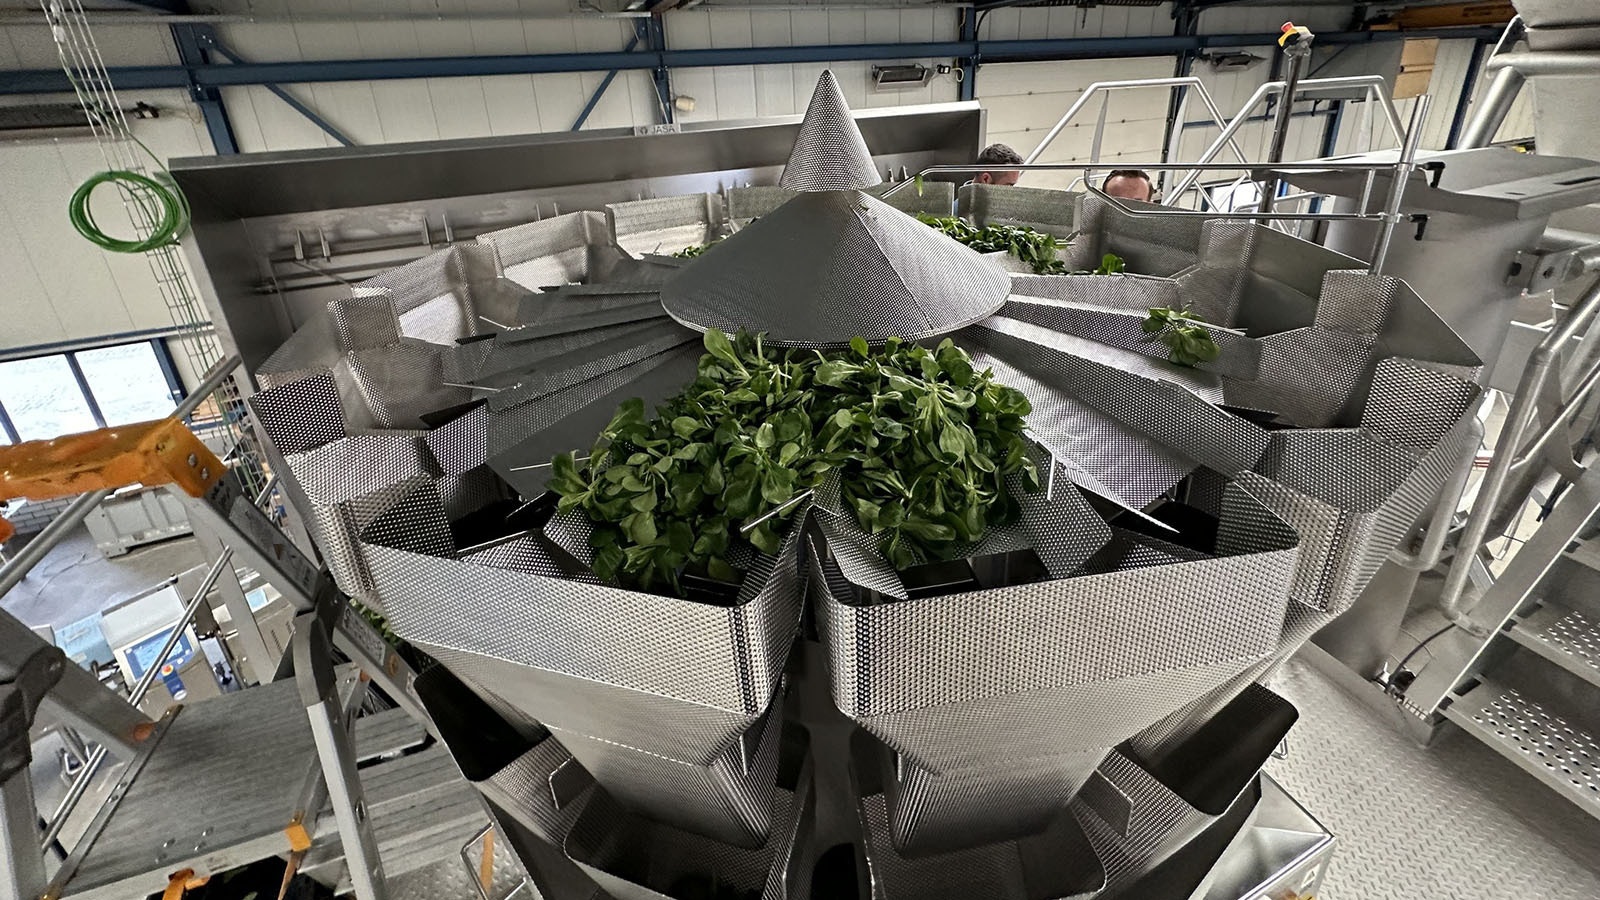 Fresh greens produced by Vertical Harvest are washed and prepared.